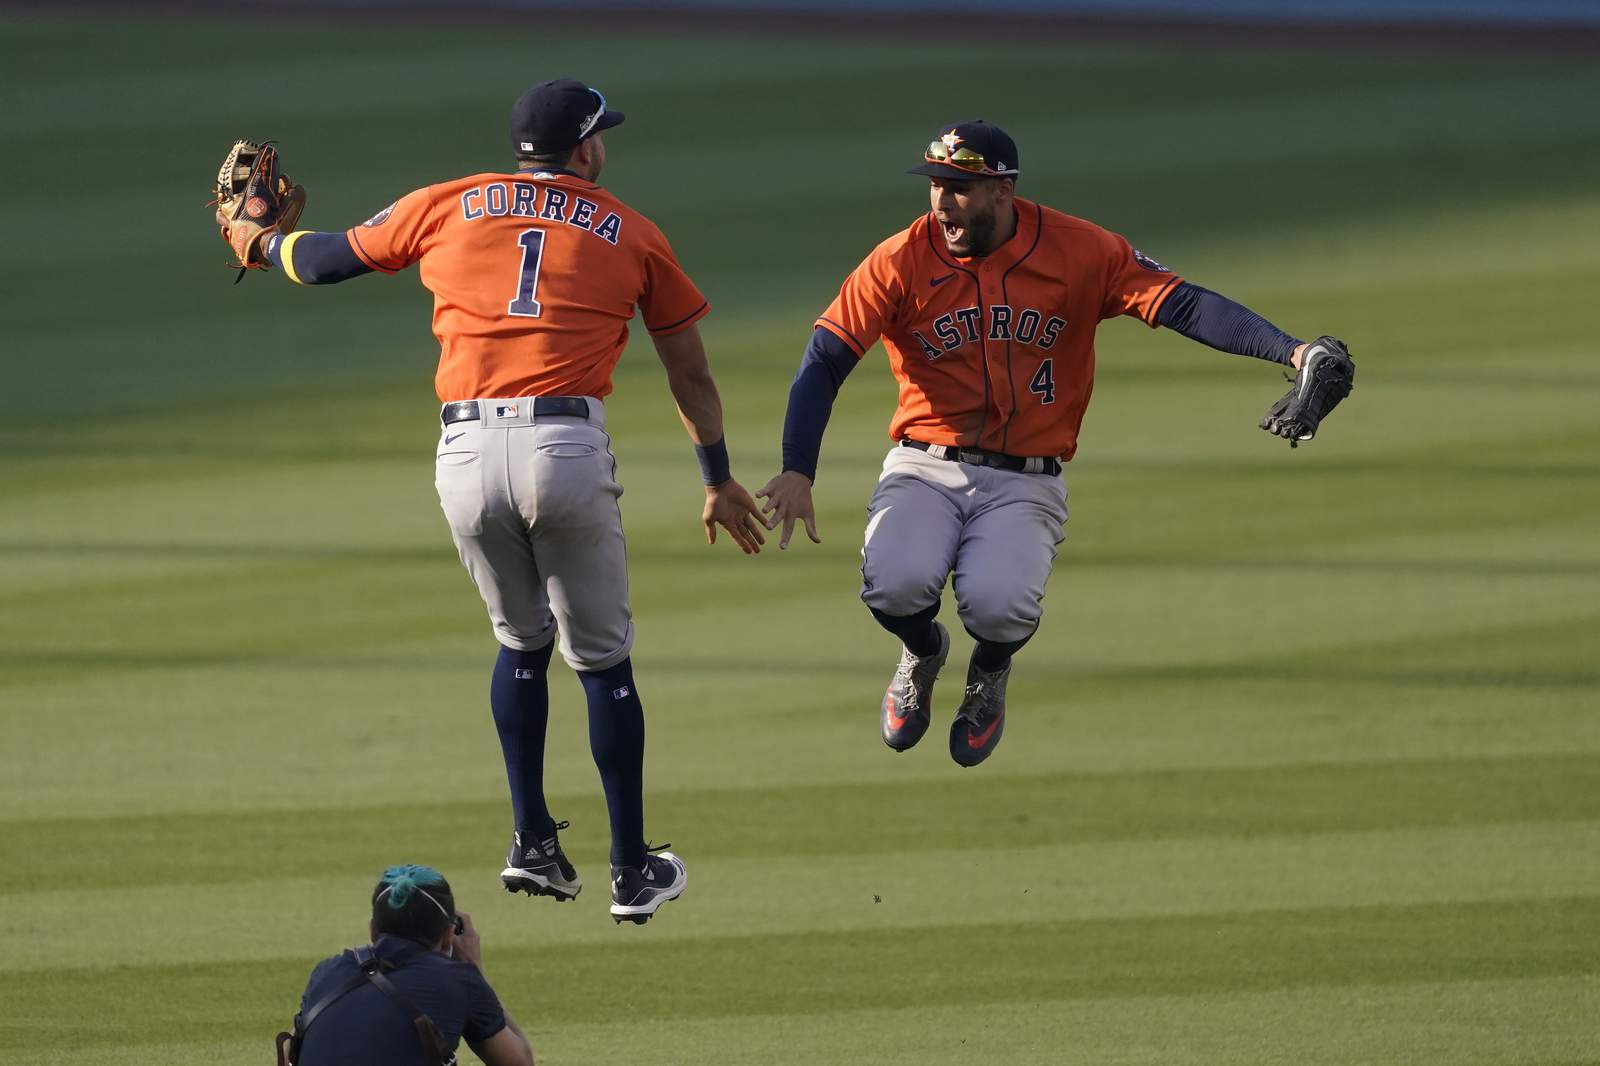 Correa, Springer rally Astros past A's 10-5 in ALDS opener